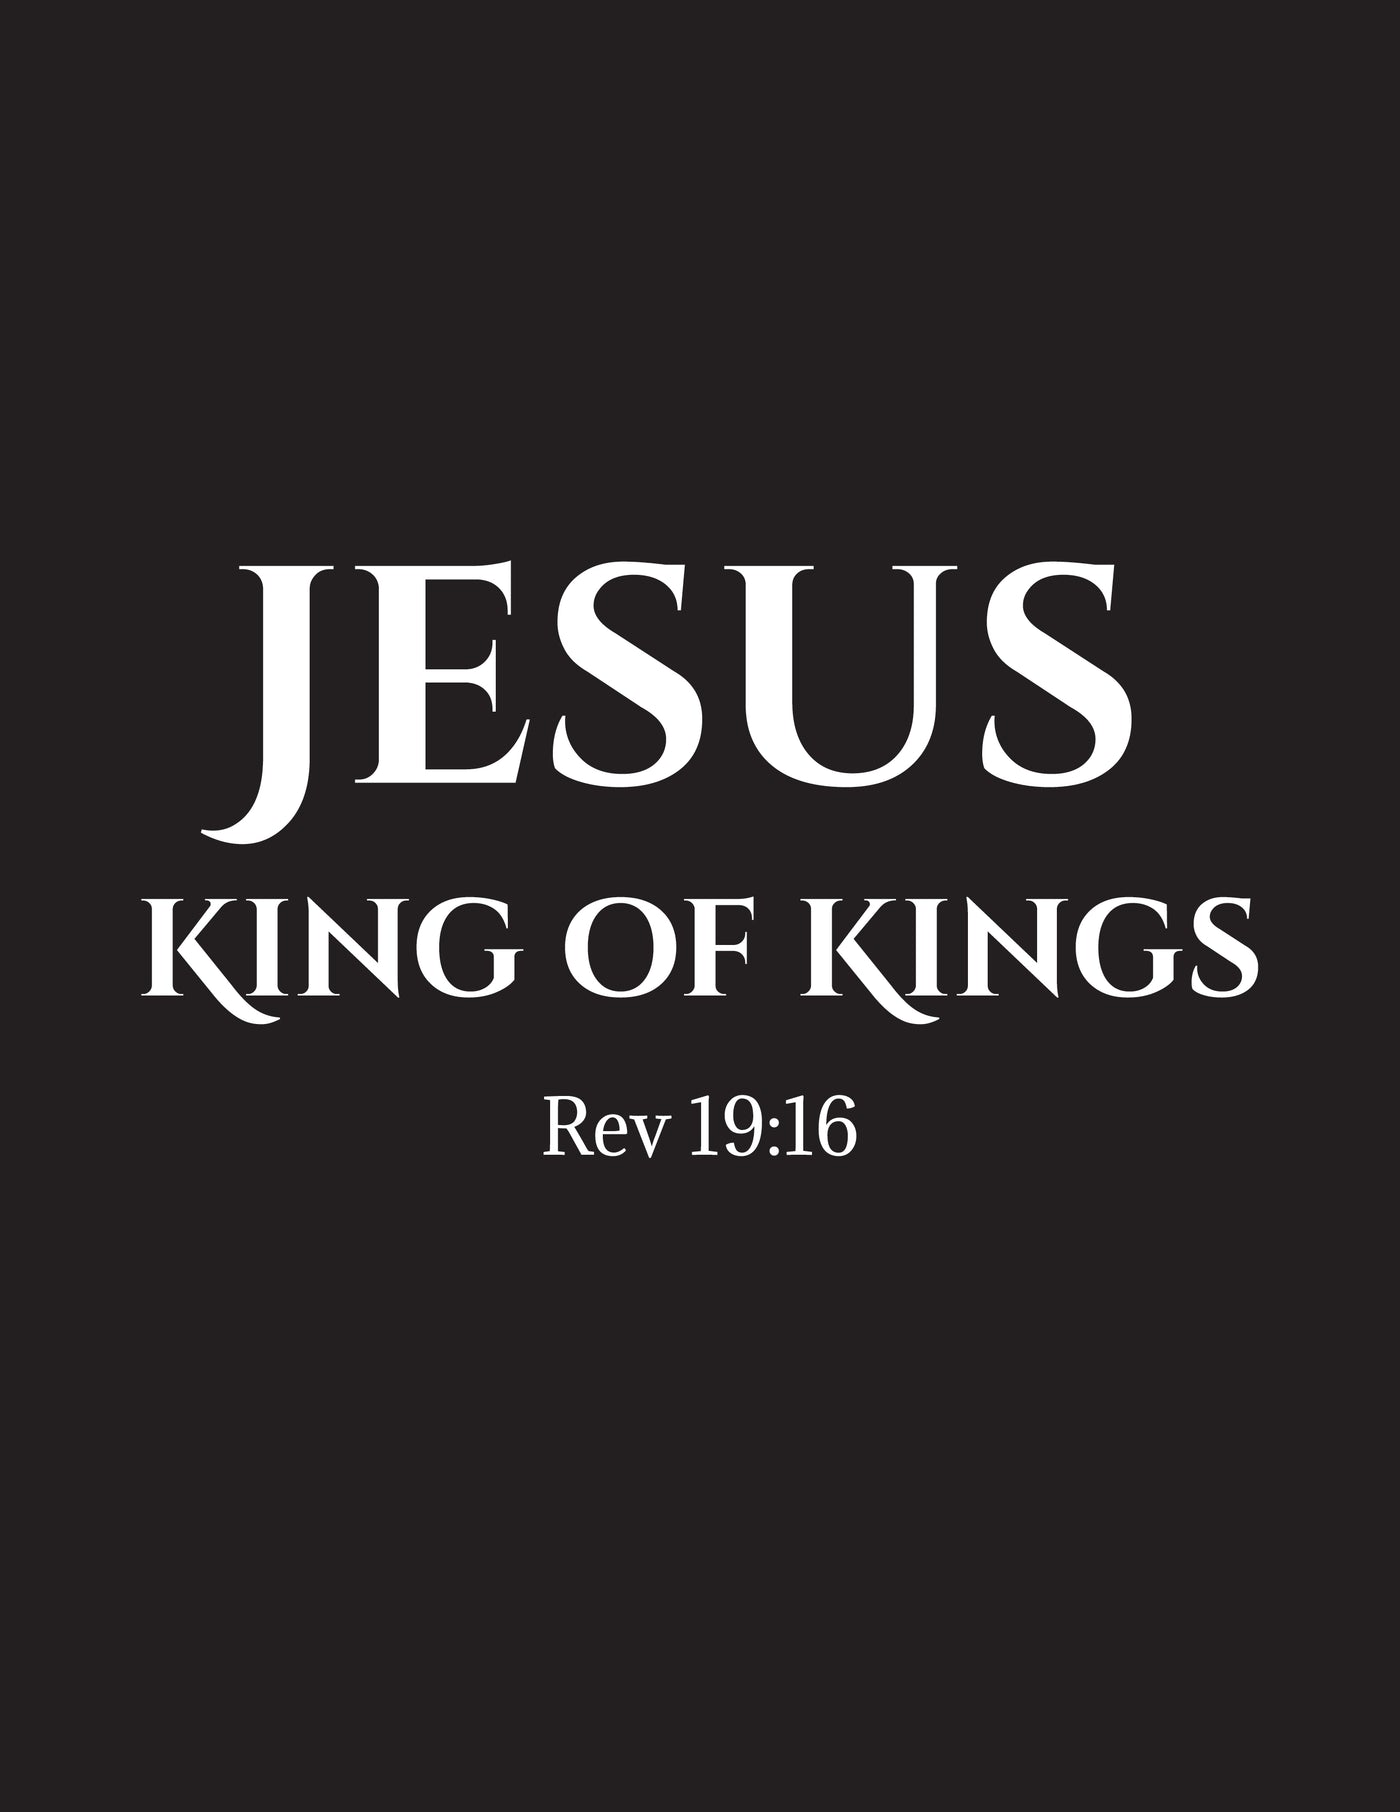 F&H Christian Jesus King of Kings Women's T-Shirt - Faith and Happiness Store